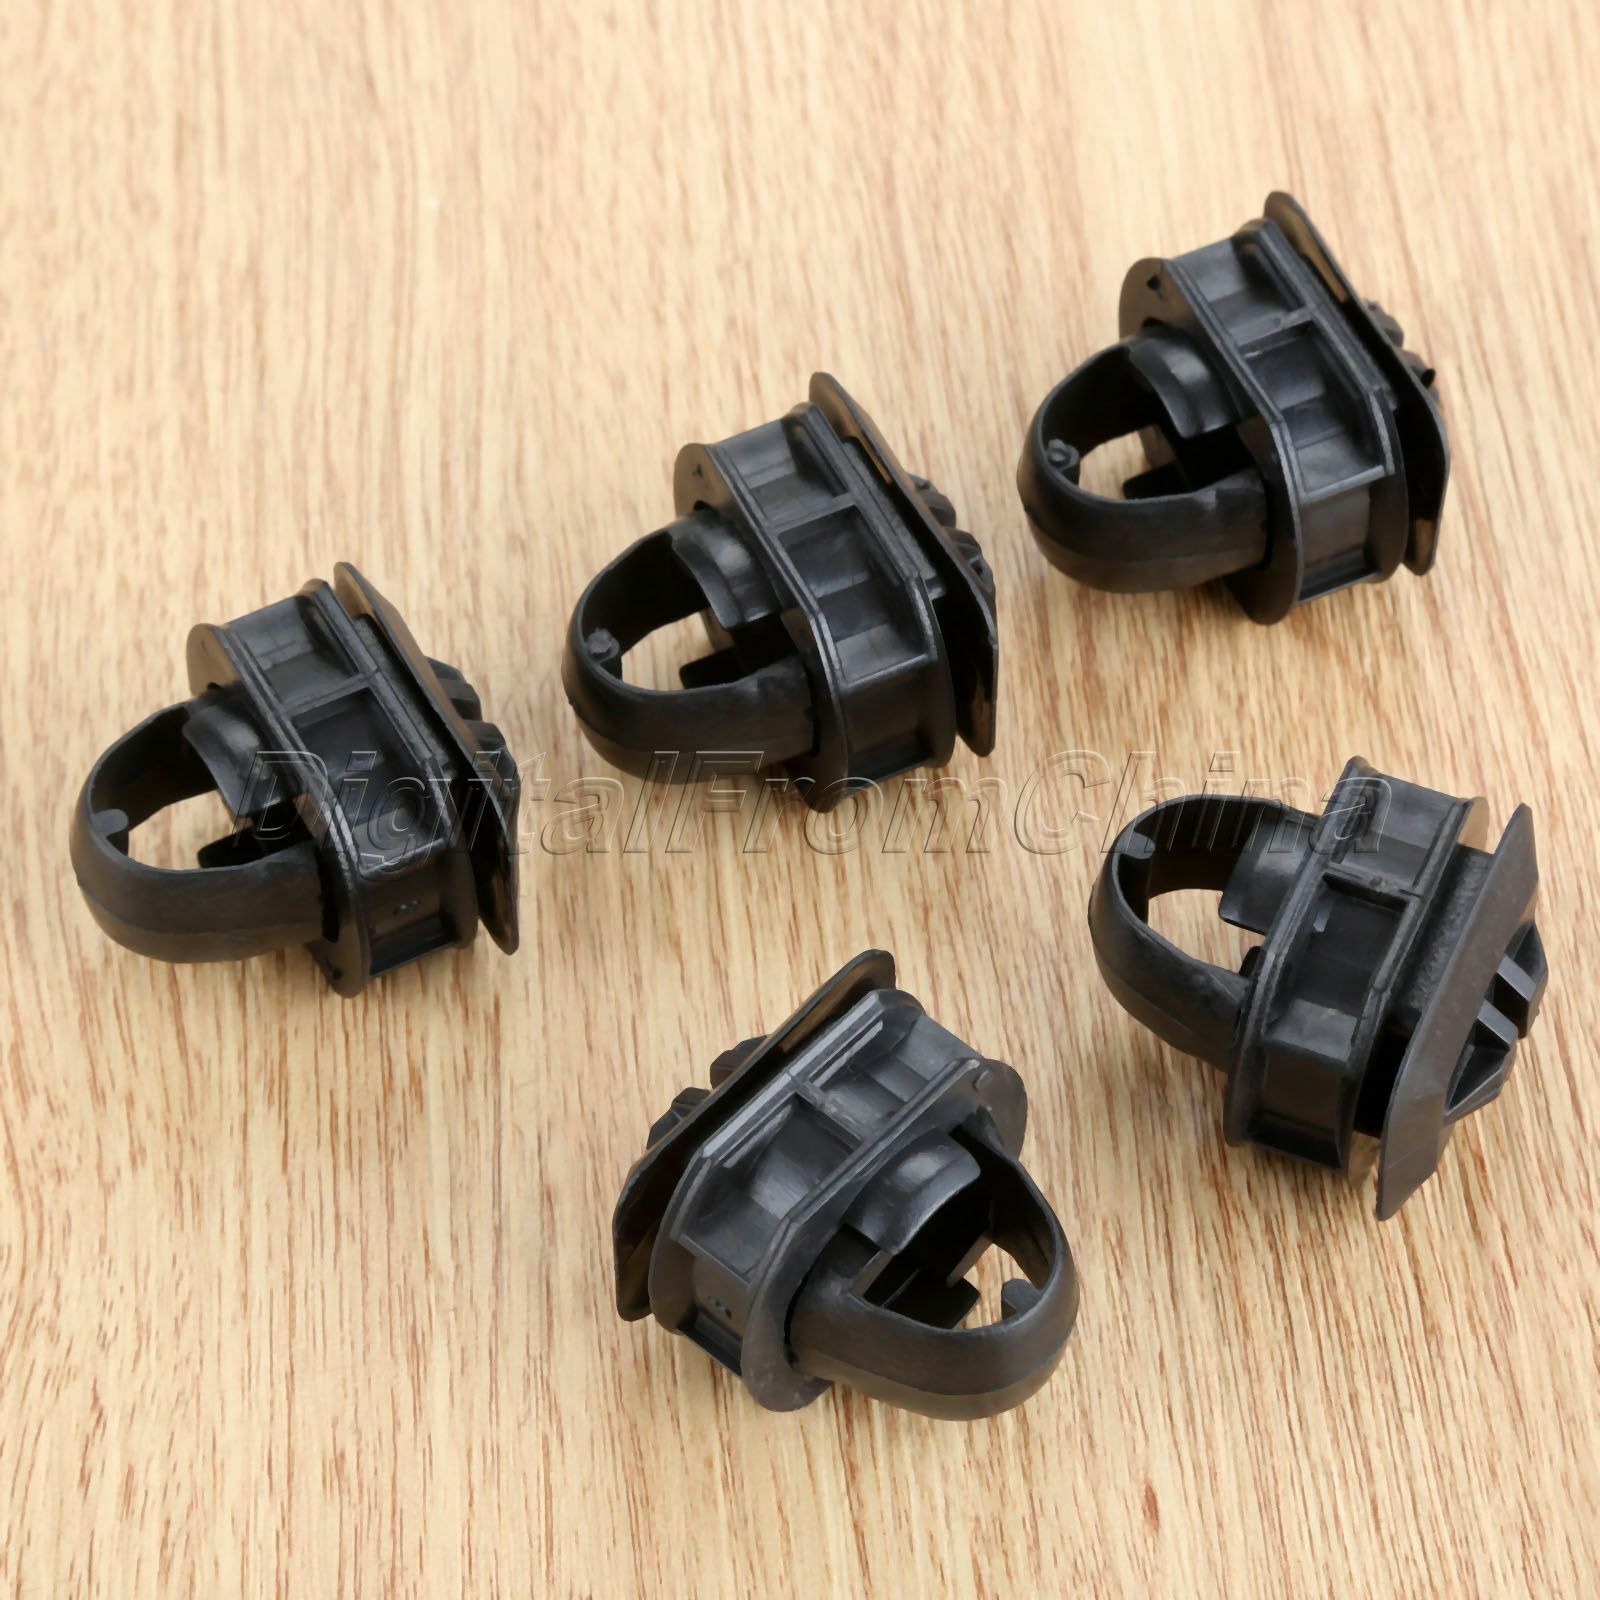 10Pcs Car Side Skirt Trim Retainers Fasteners Clips for Mercedes Benz C/E/CLK 